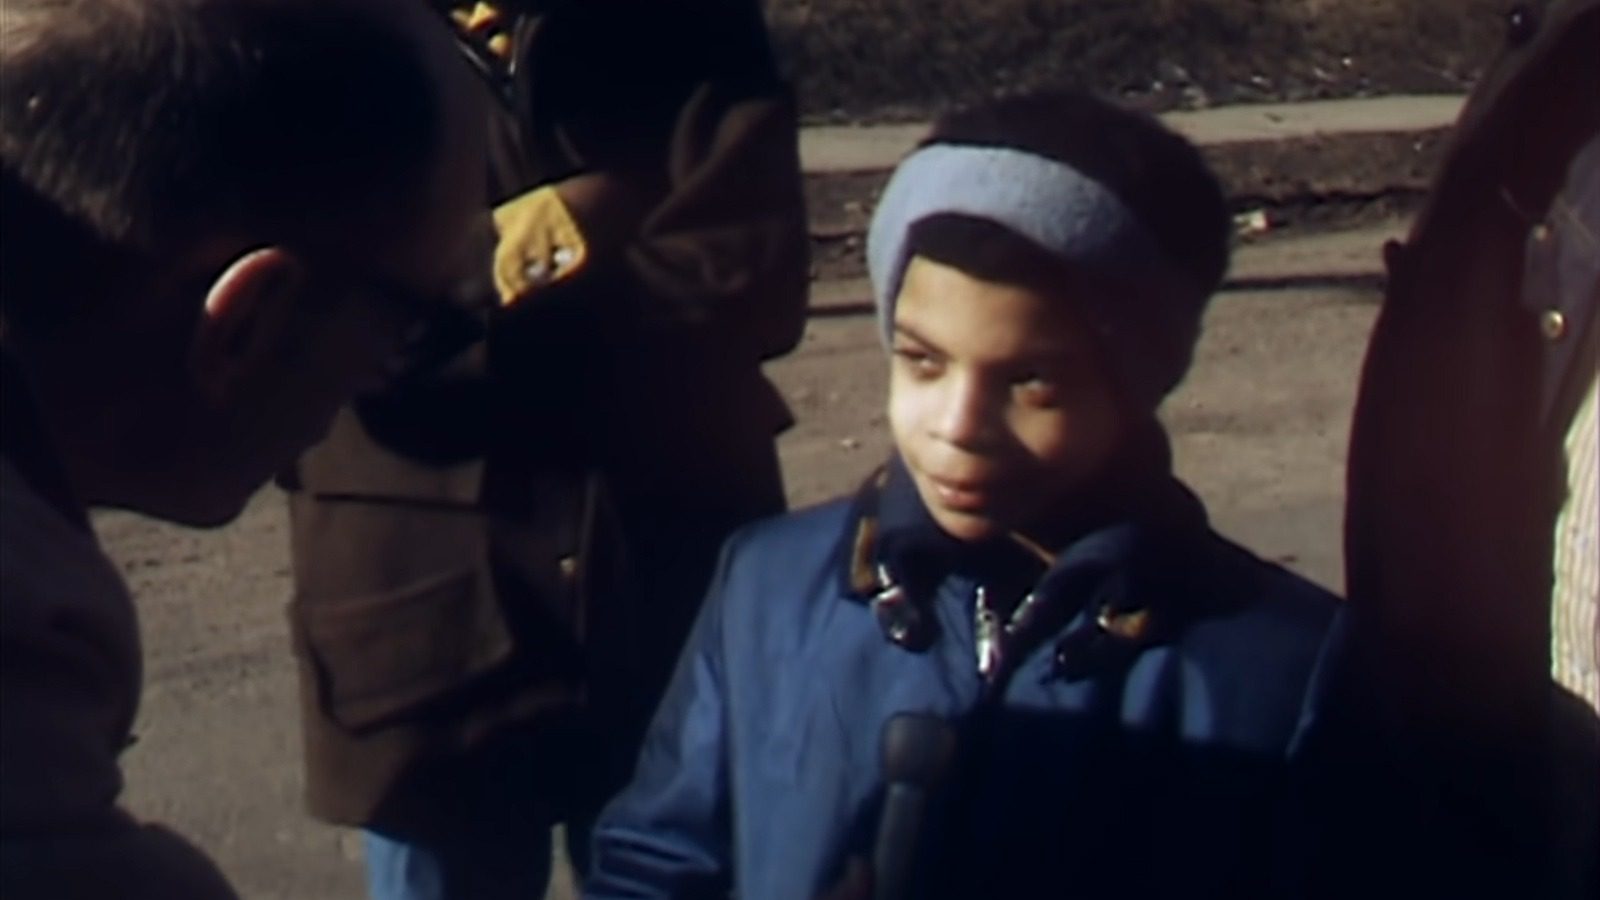 An 11-year-old Prince spoke out in support of his striking Minneapolis teachers – a historian of the city’s music scene explains why